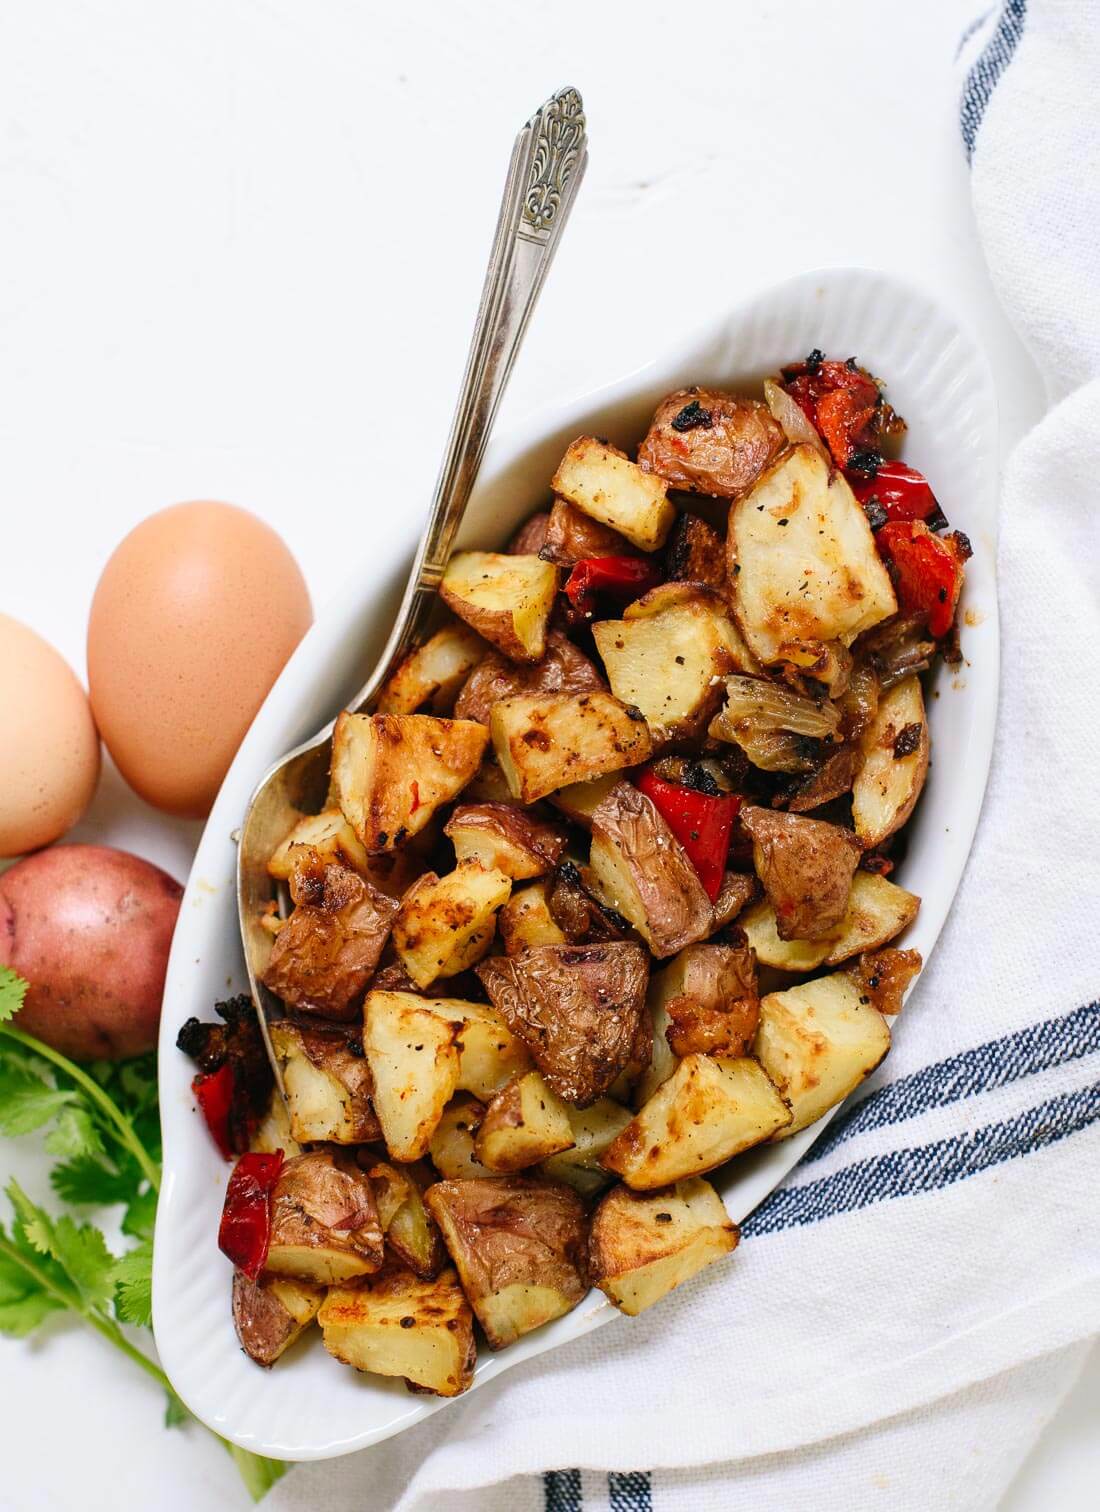 Amazing crispy roasted breakfast potatoes (also called home fries!) - cookieandkate.com